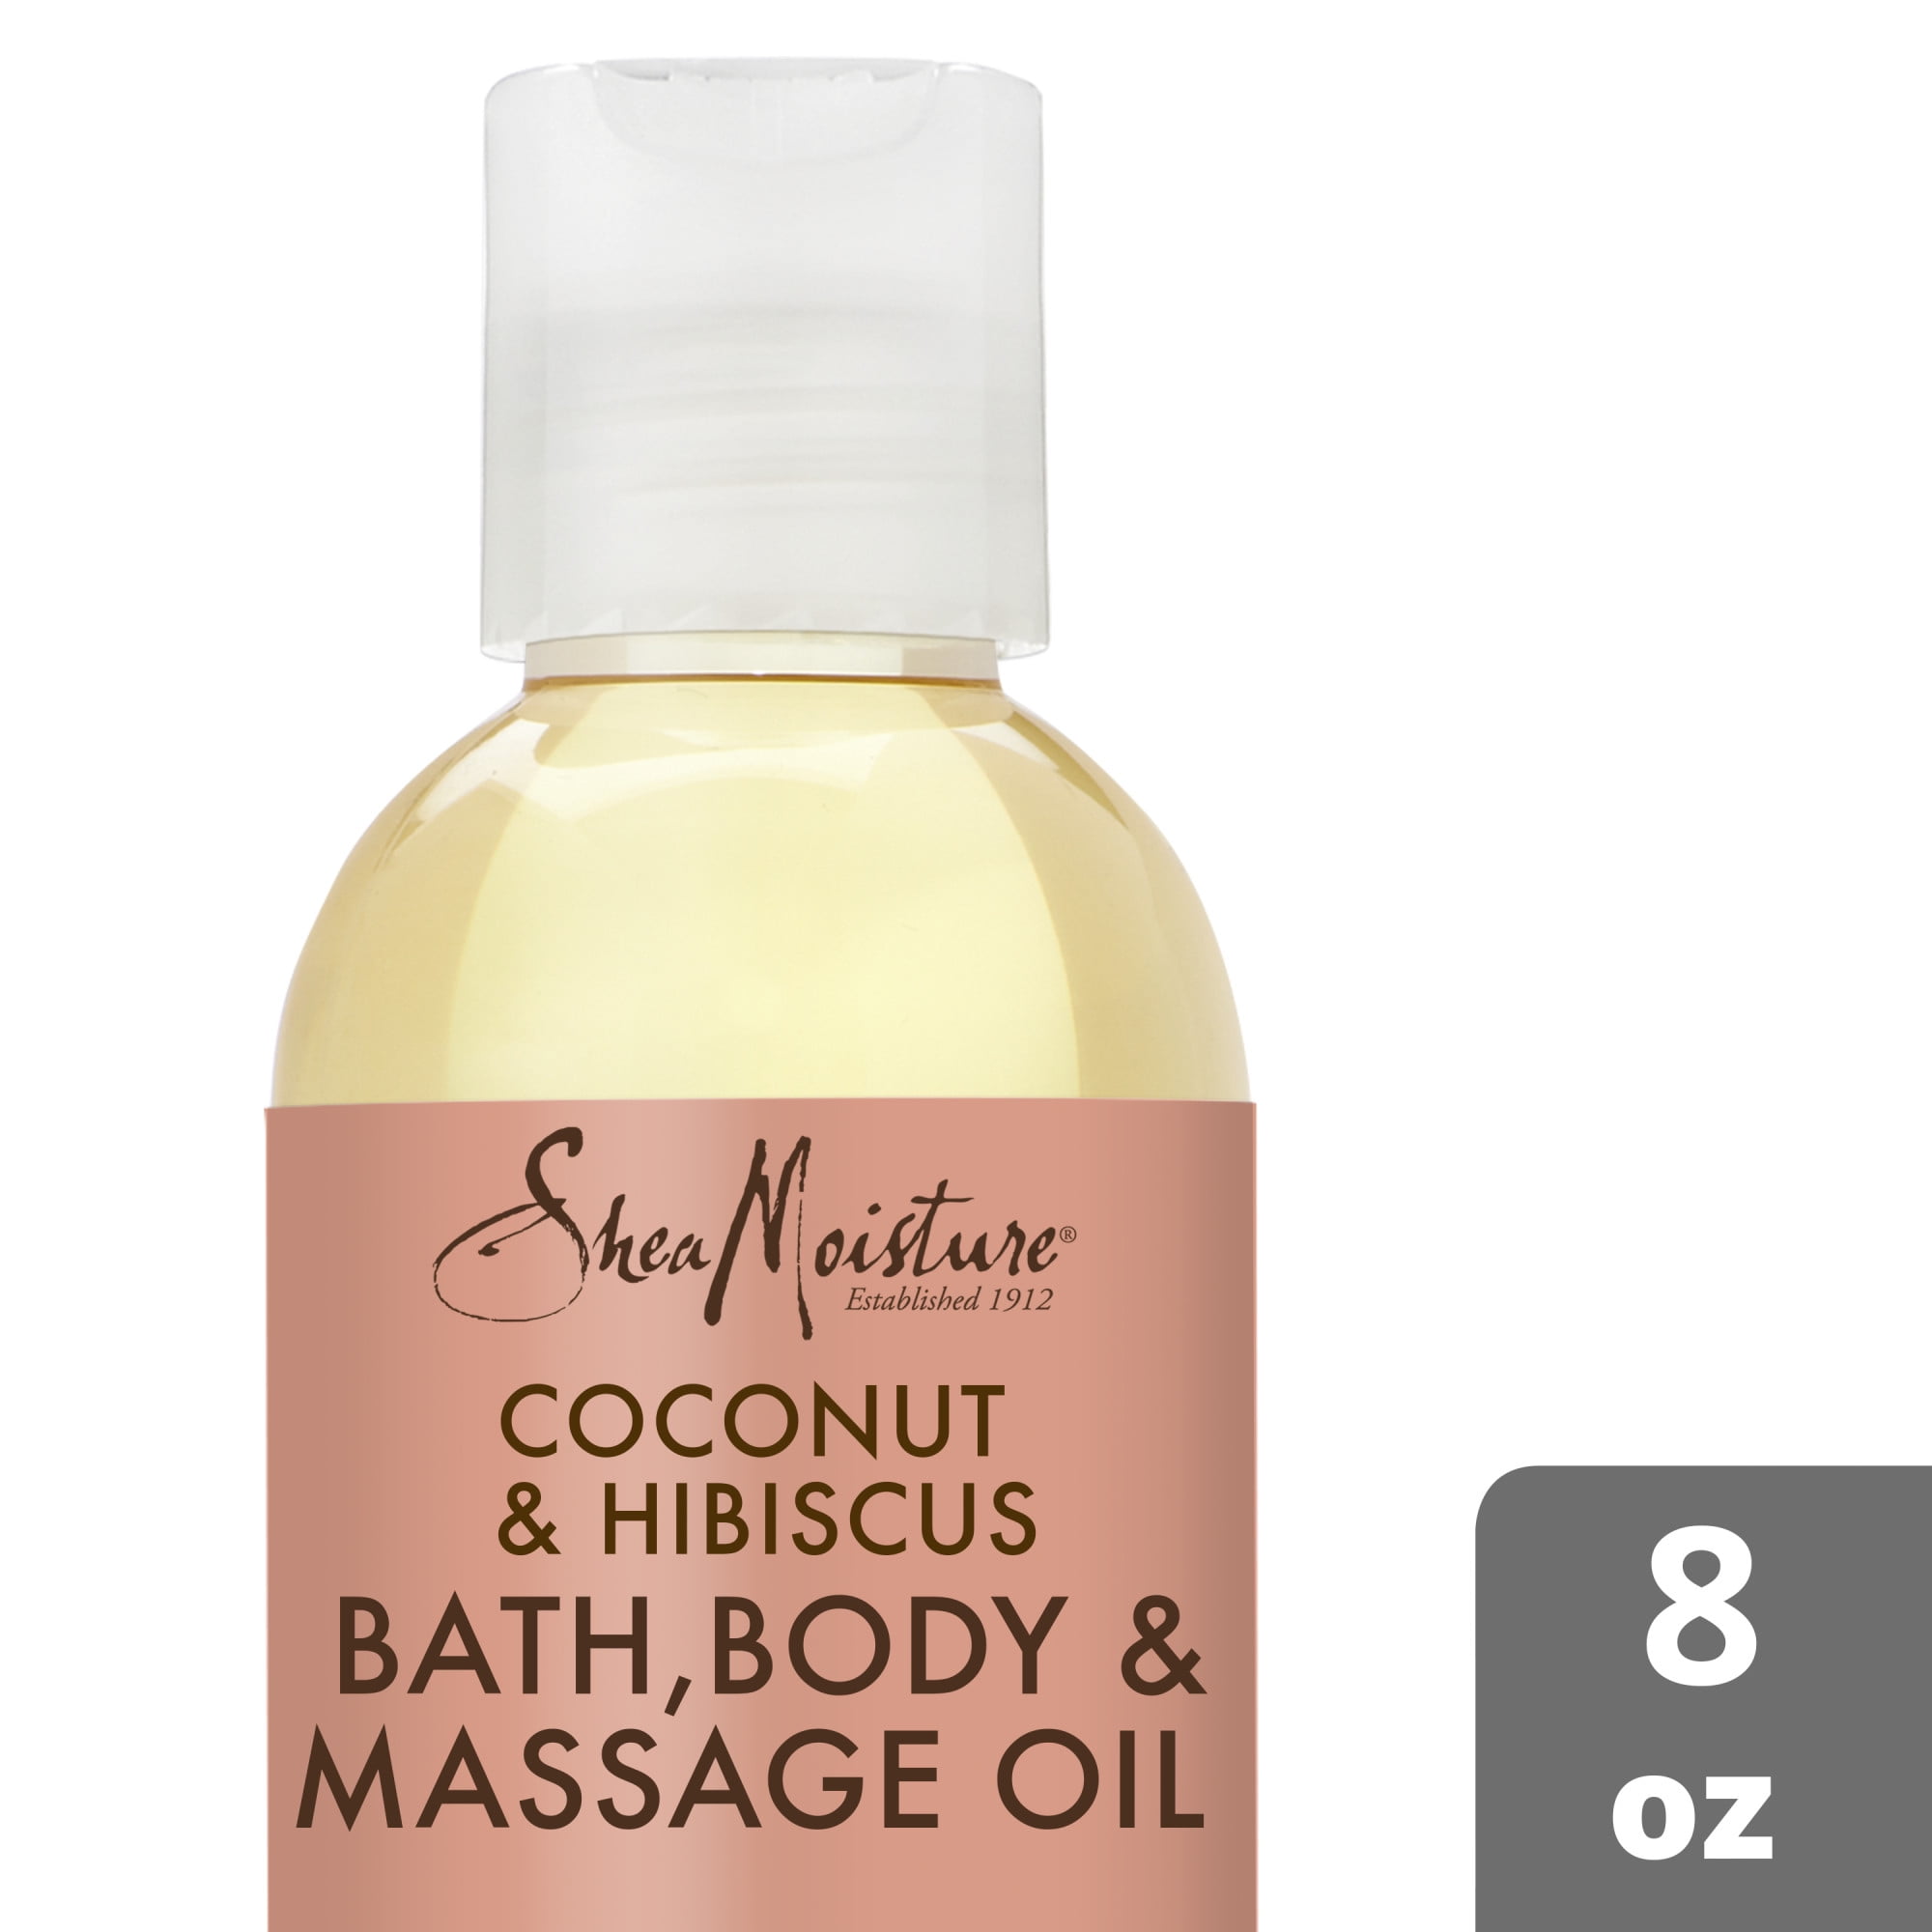 SheaMoisture Bath, Body and Massage Oil Coconut Oil and Hibiscus, 8